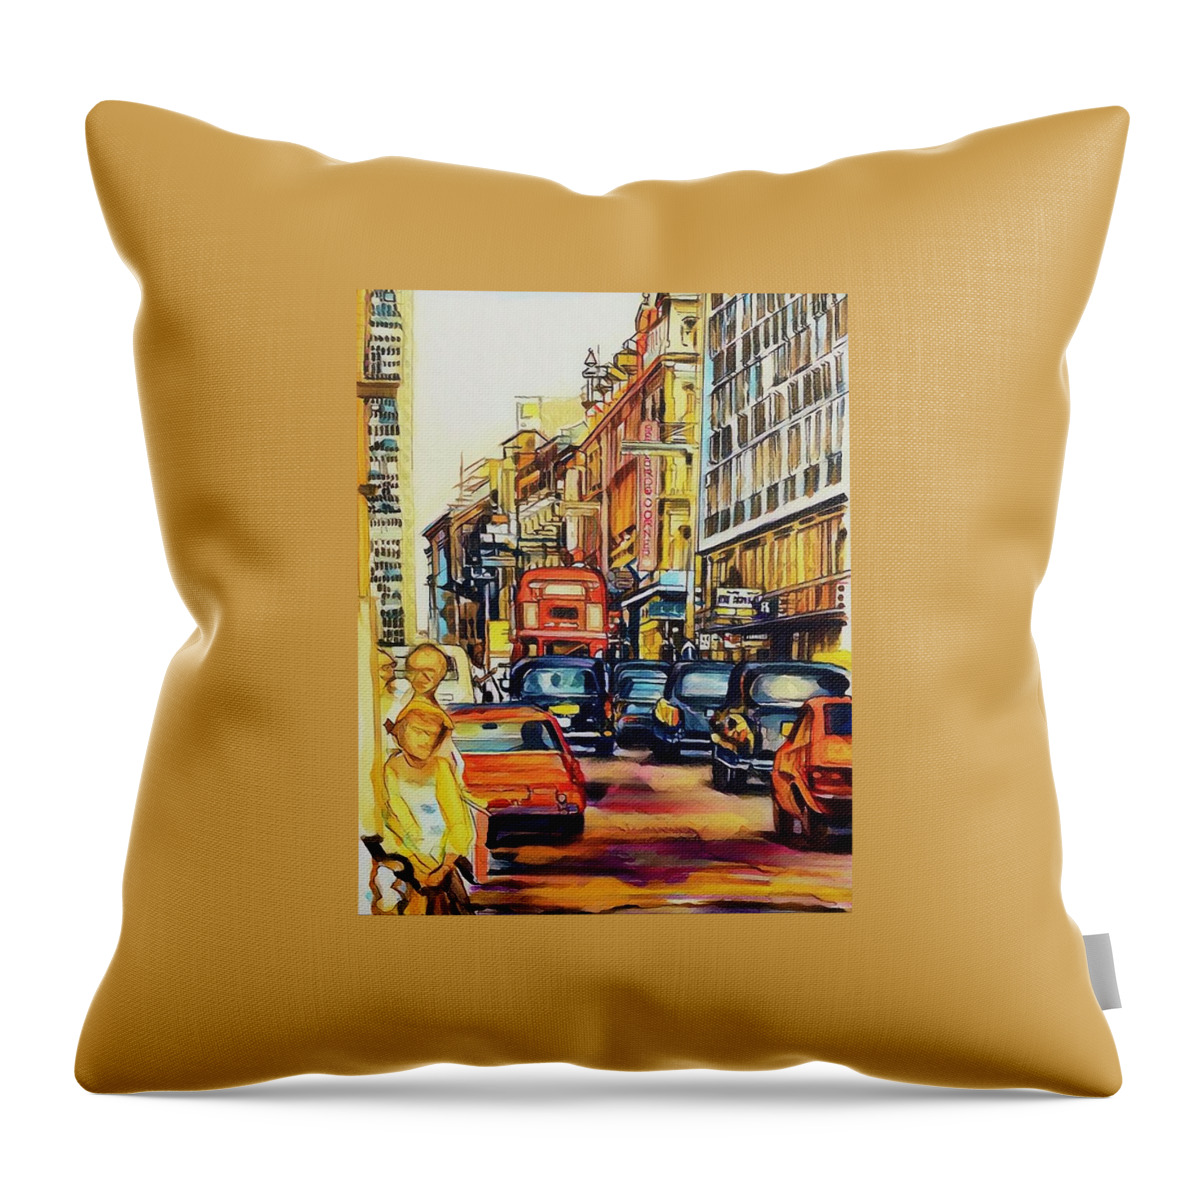  Throw Pillow featuring the painting Gaps by Try Cheatham